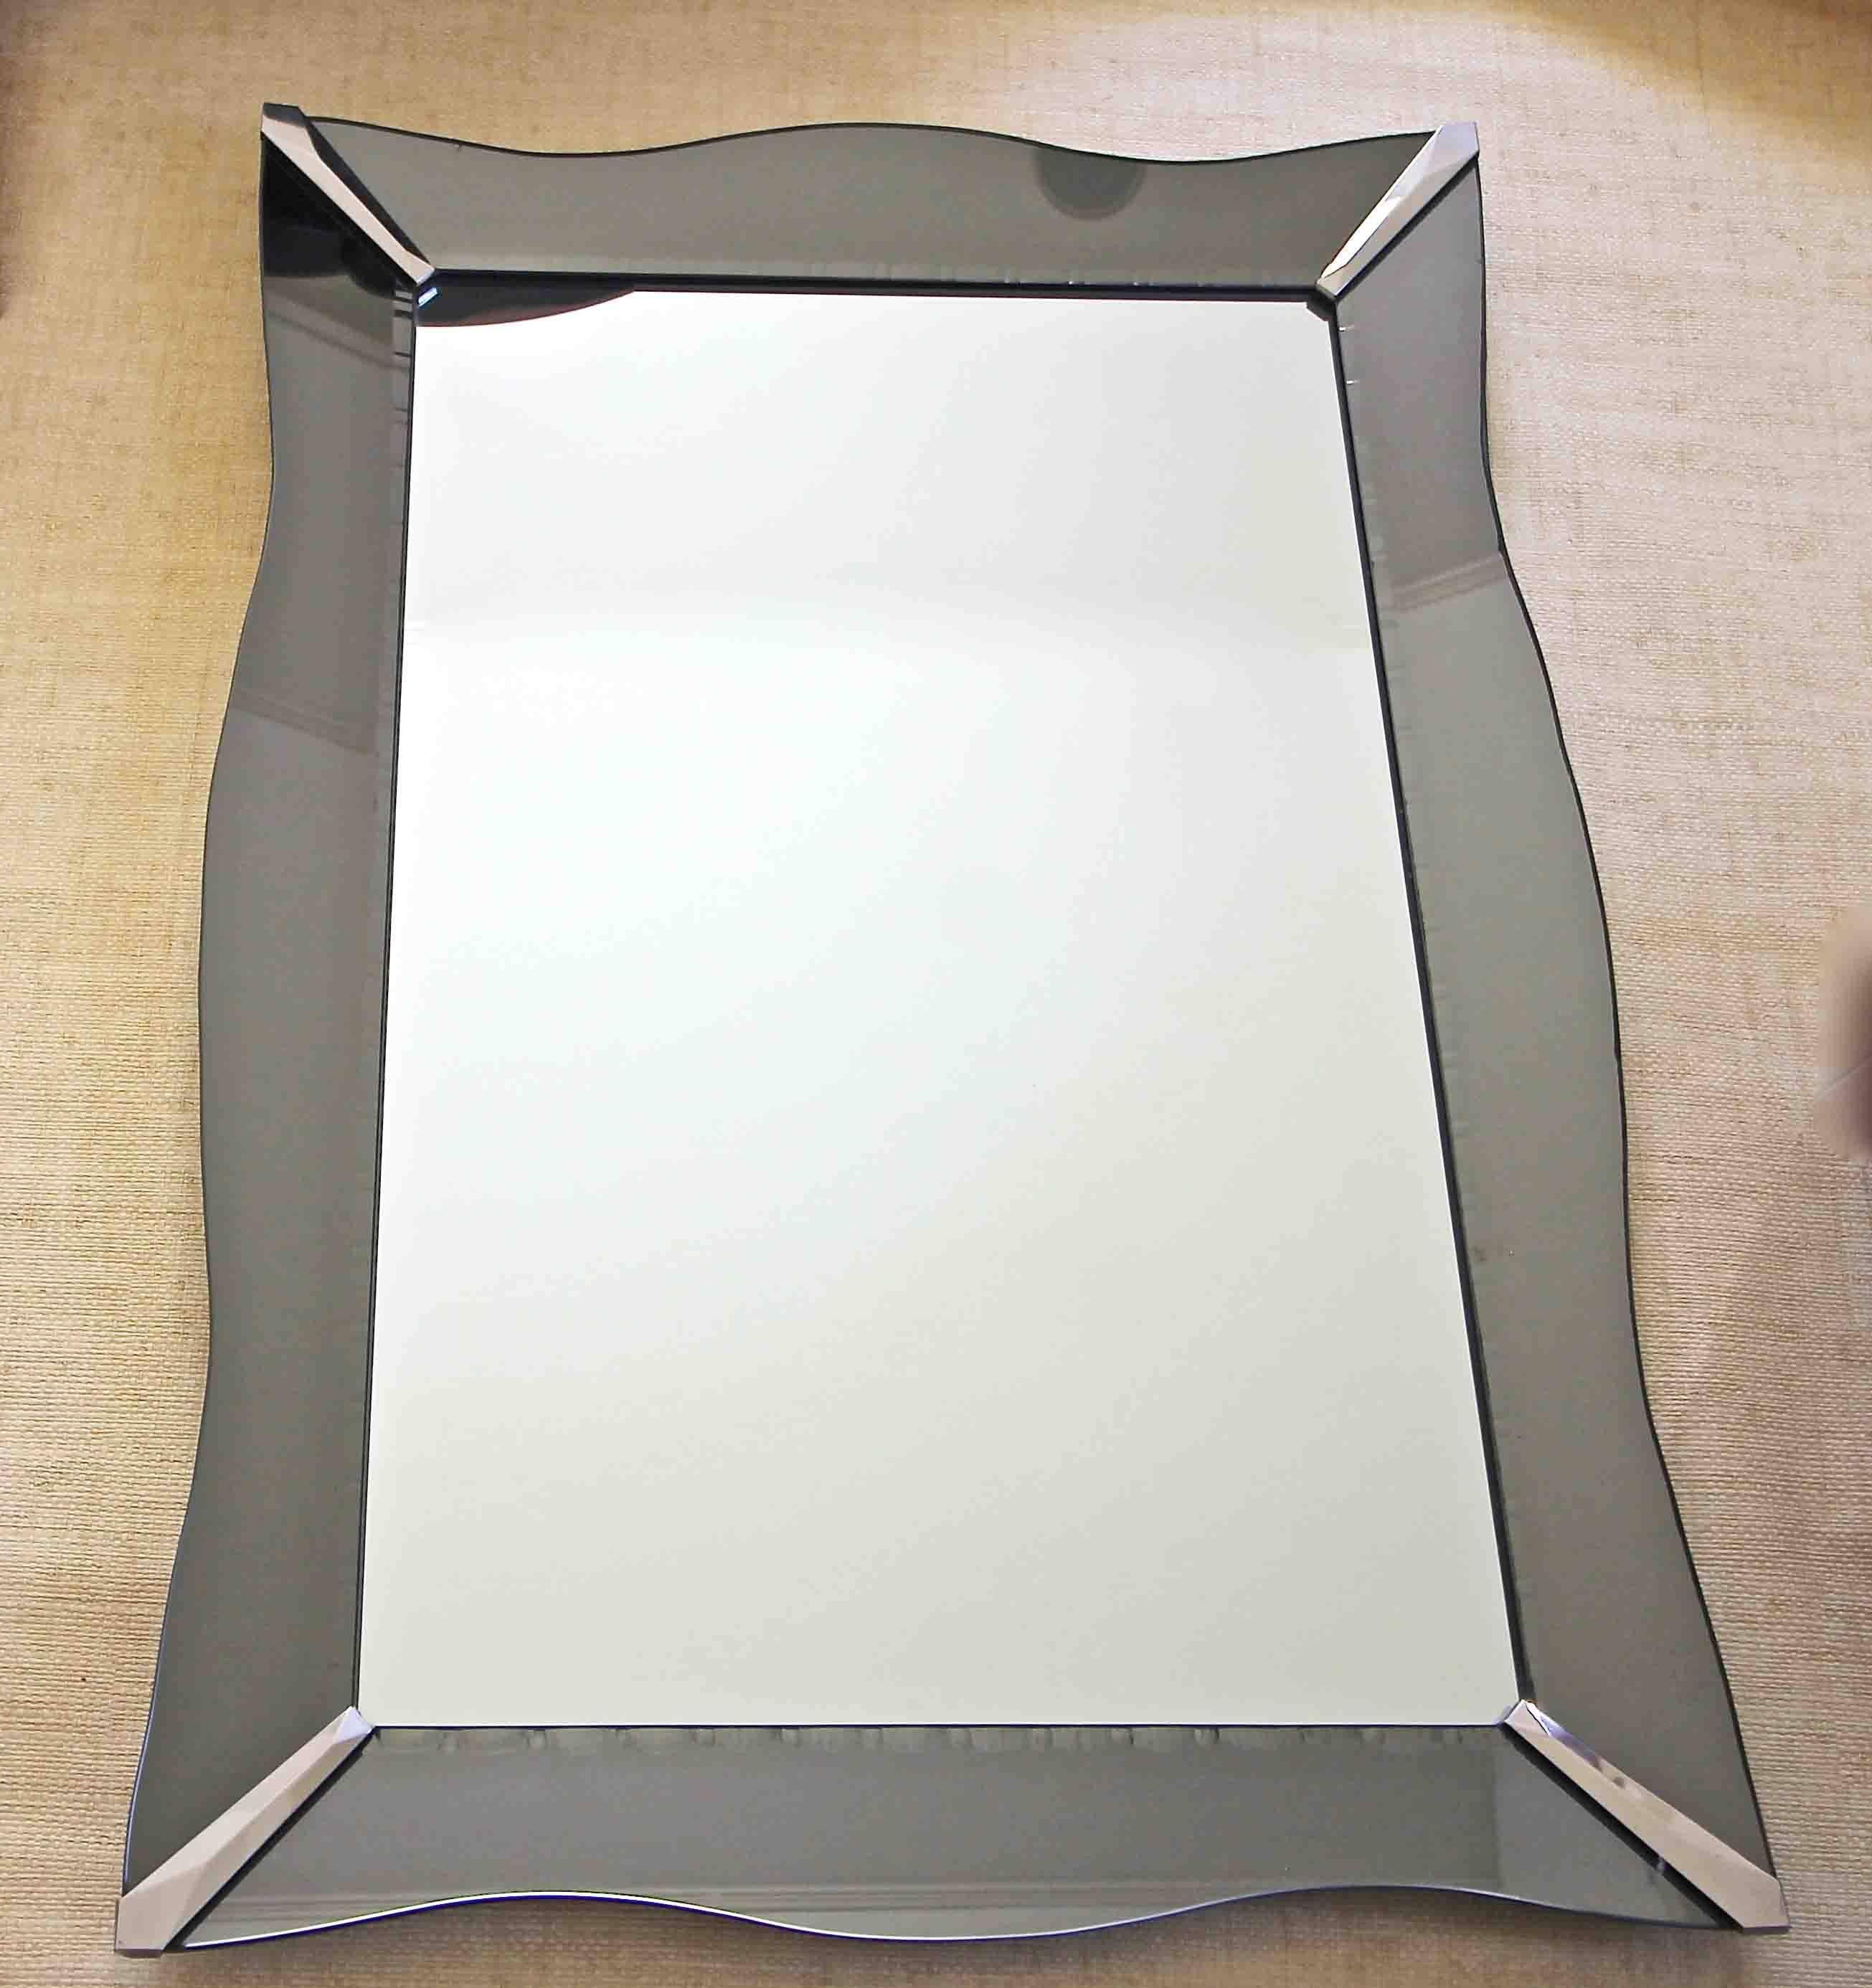 Rectangular shape Art Deco style wall mirror with smoke colored wavy curved glass panels on wood frame backing. Detailed wheel cut etched edges to interior side of smoke color glass panels. Can be hung vertically as shown or horizontally with added